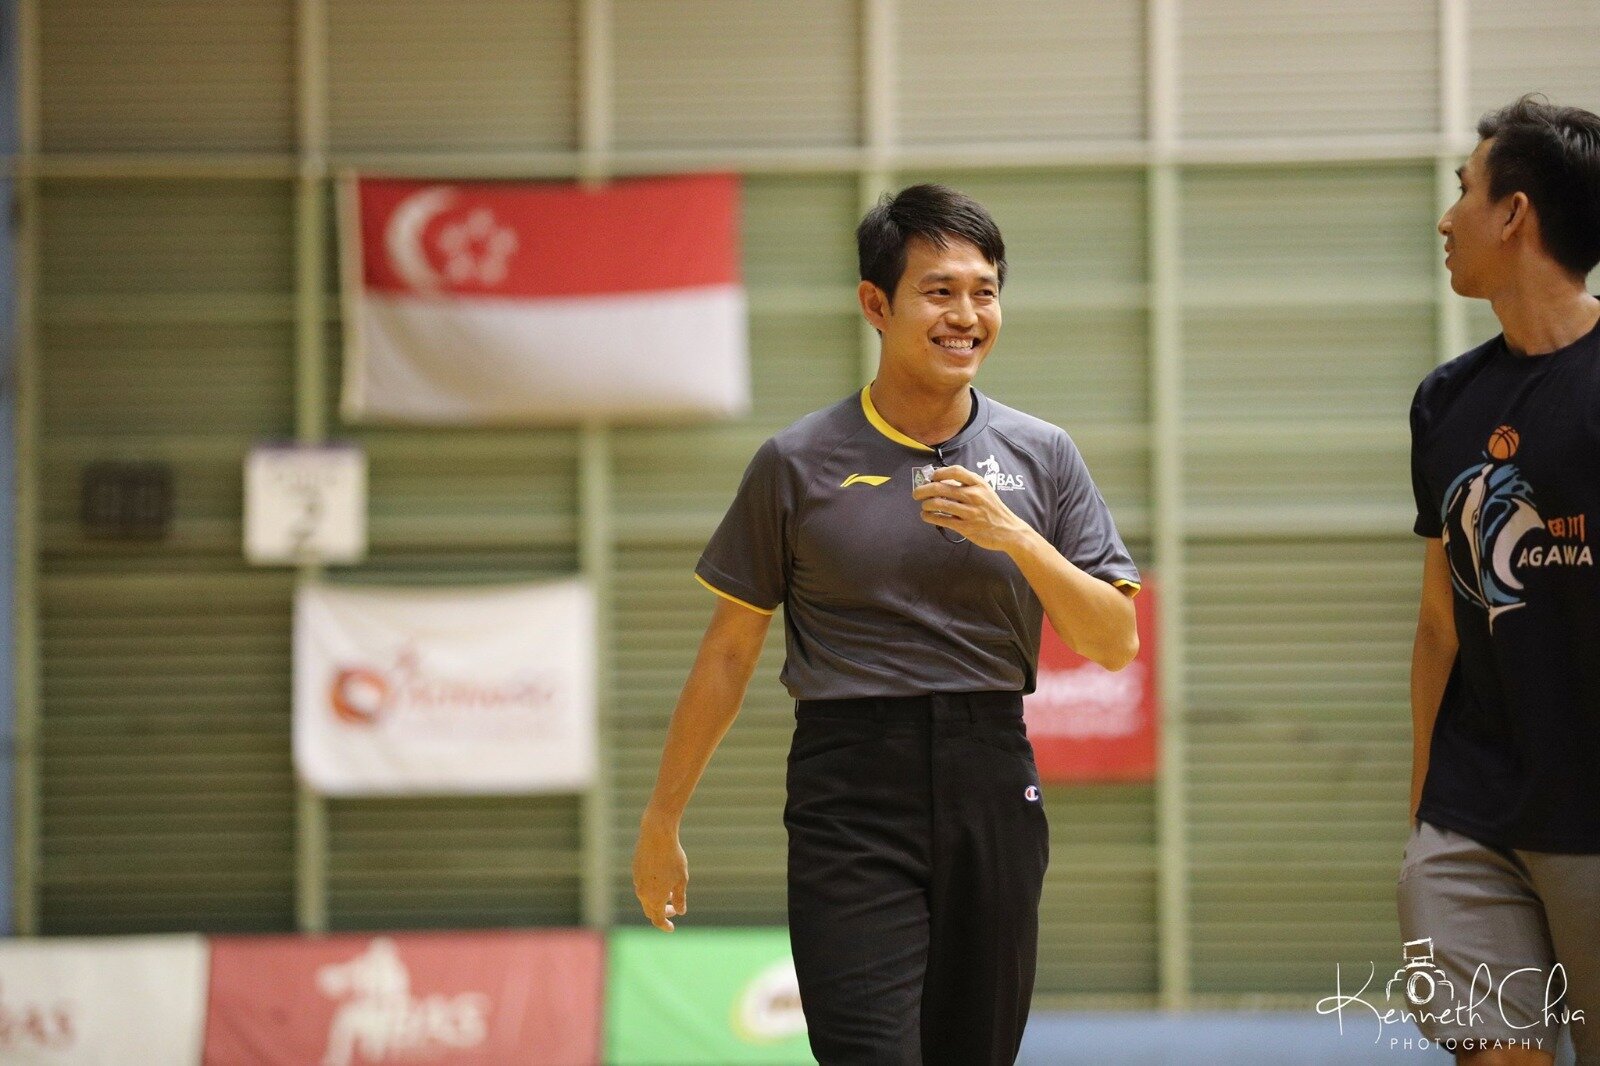 Leong Chuen Wing's Officiating Journey — Basketball For Good Singapore